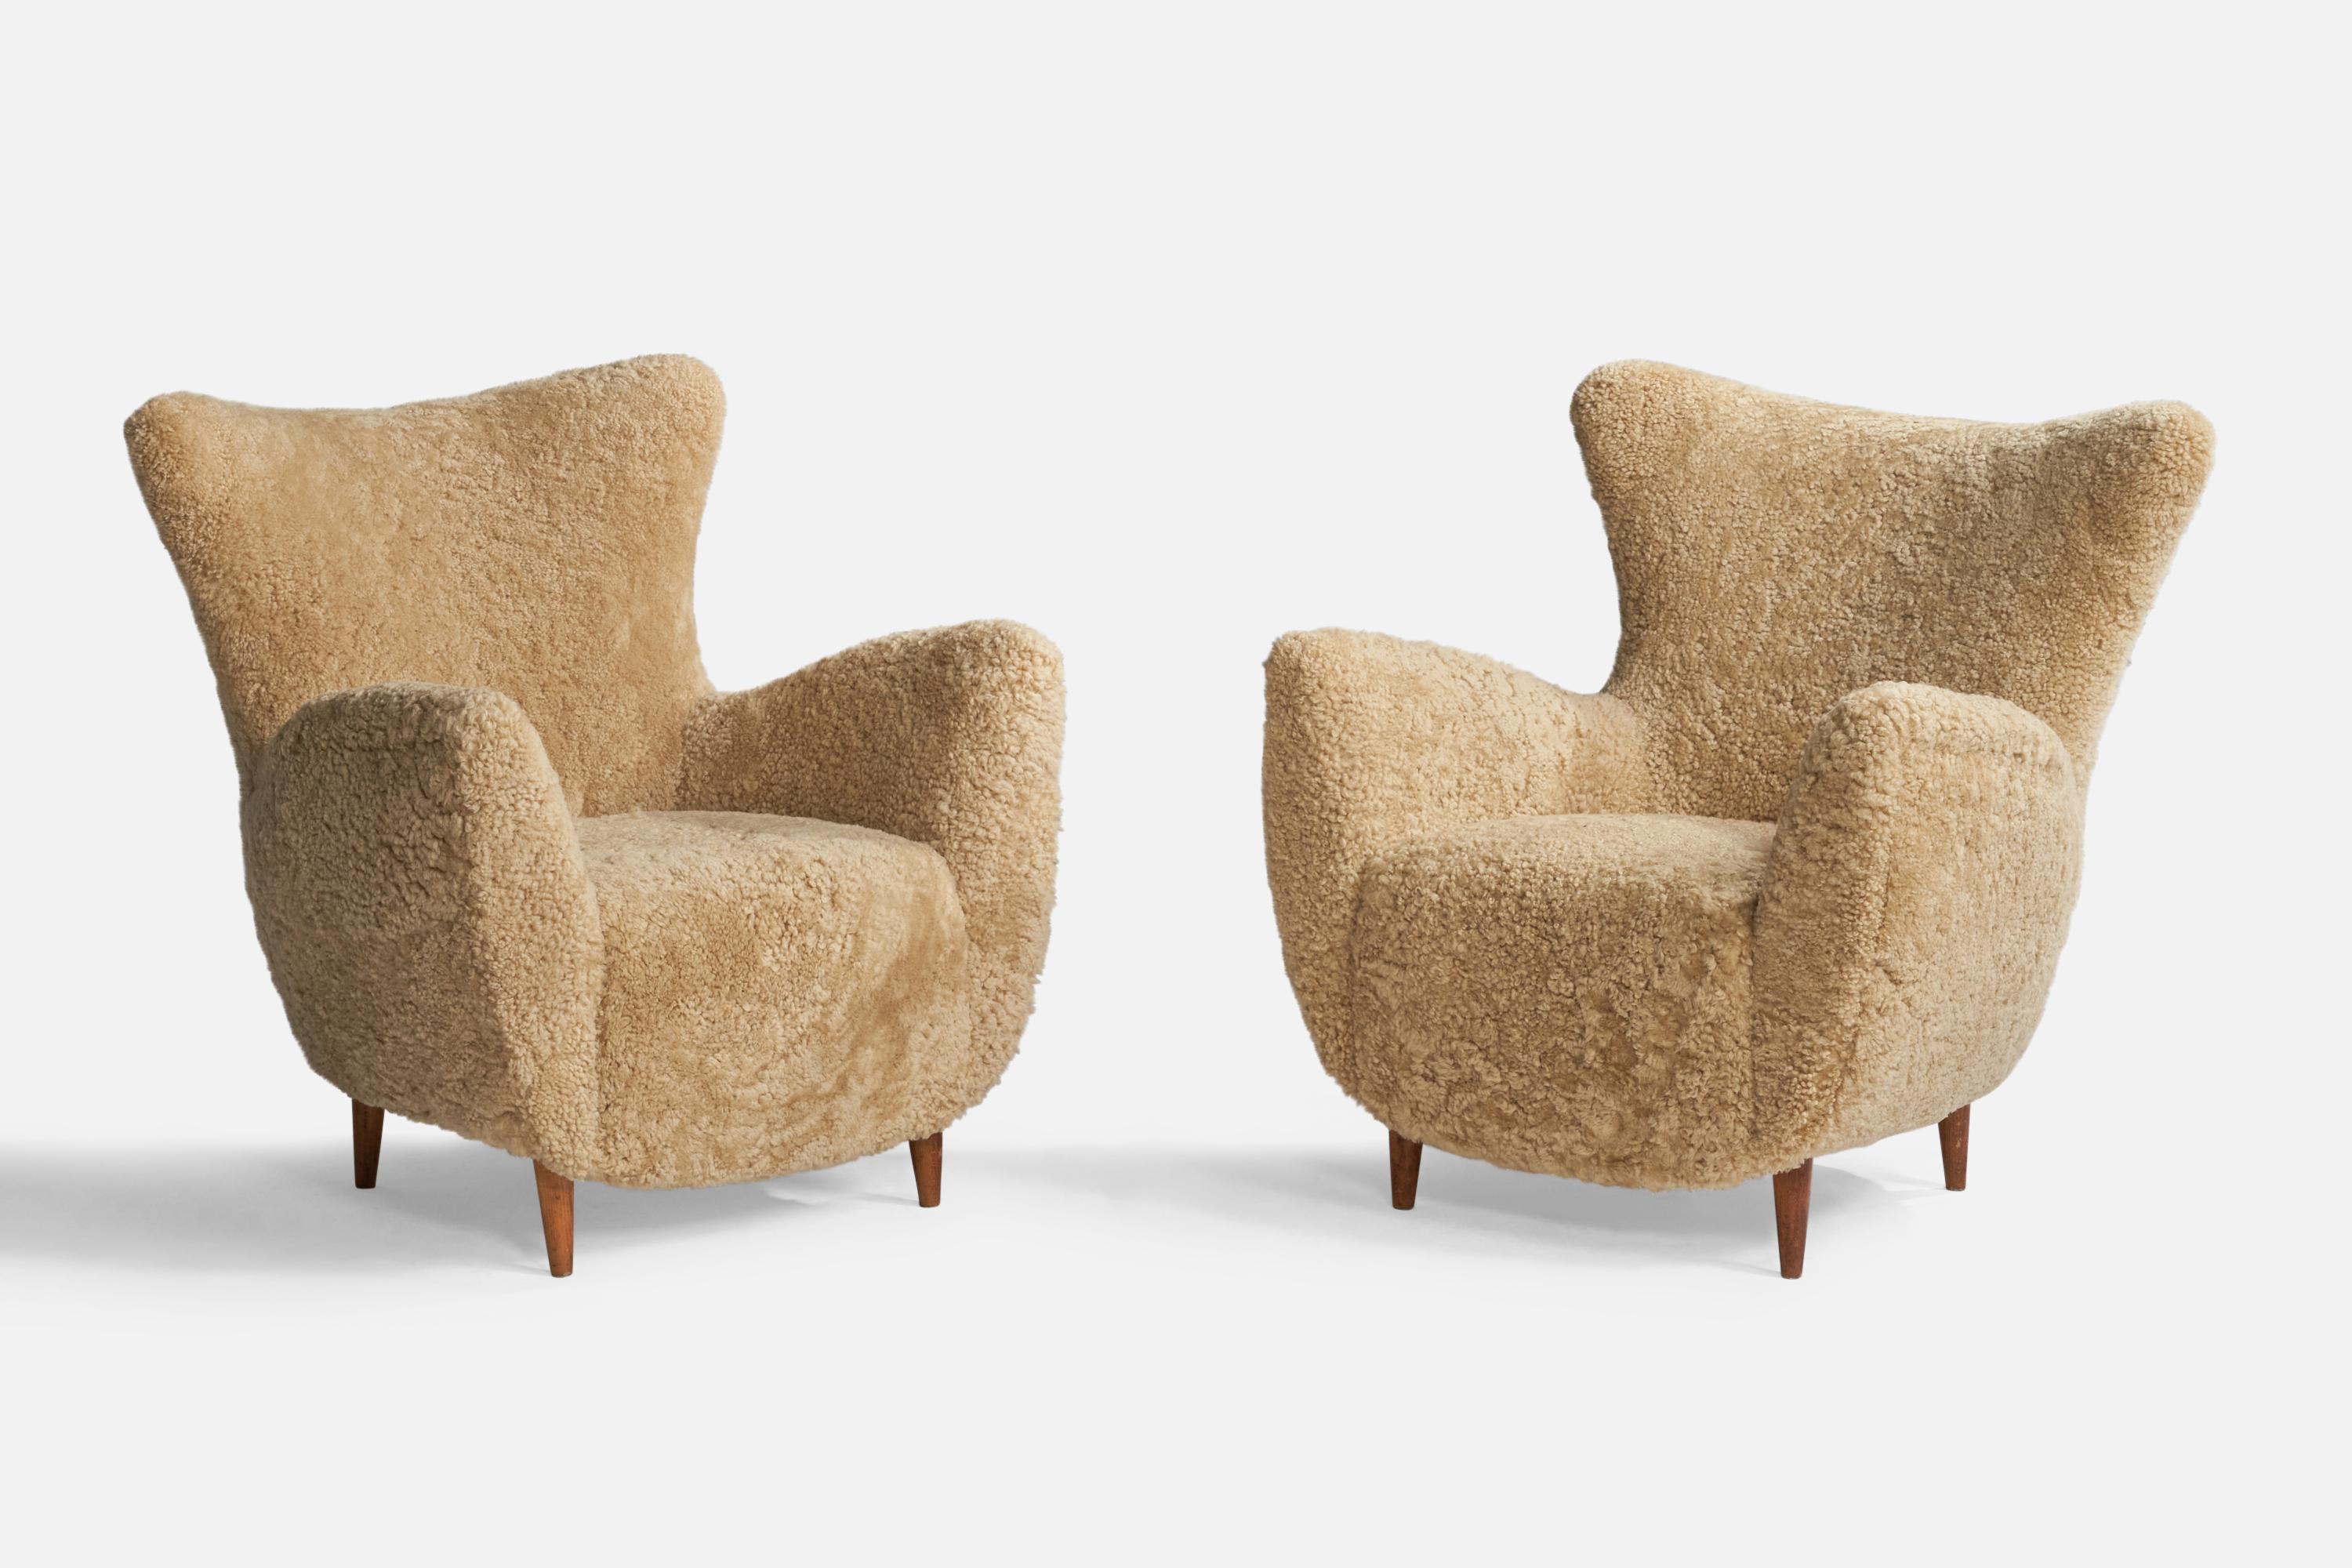 A pair of organic beige shearling and stained wood lounge chairs designed and produced in Italy, 1940s.

Seat height: 16”